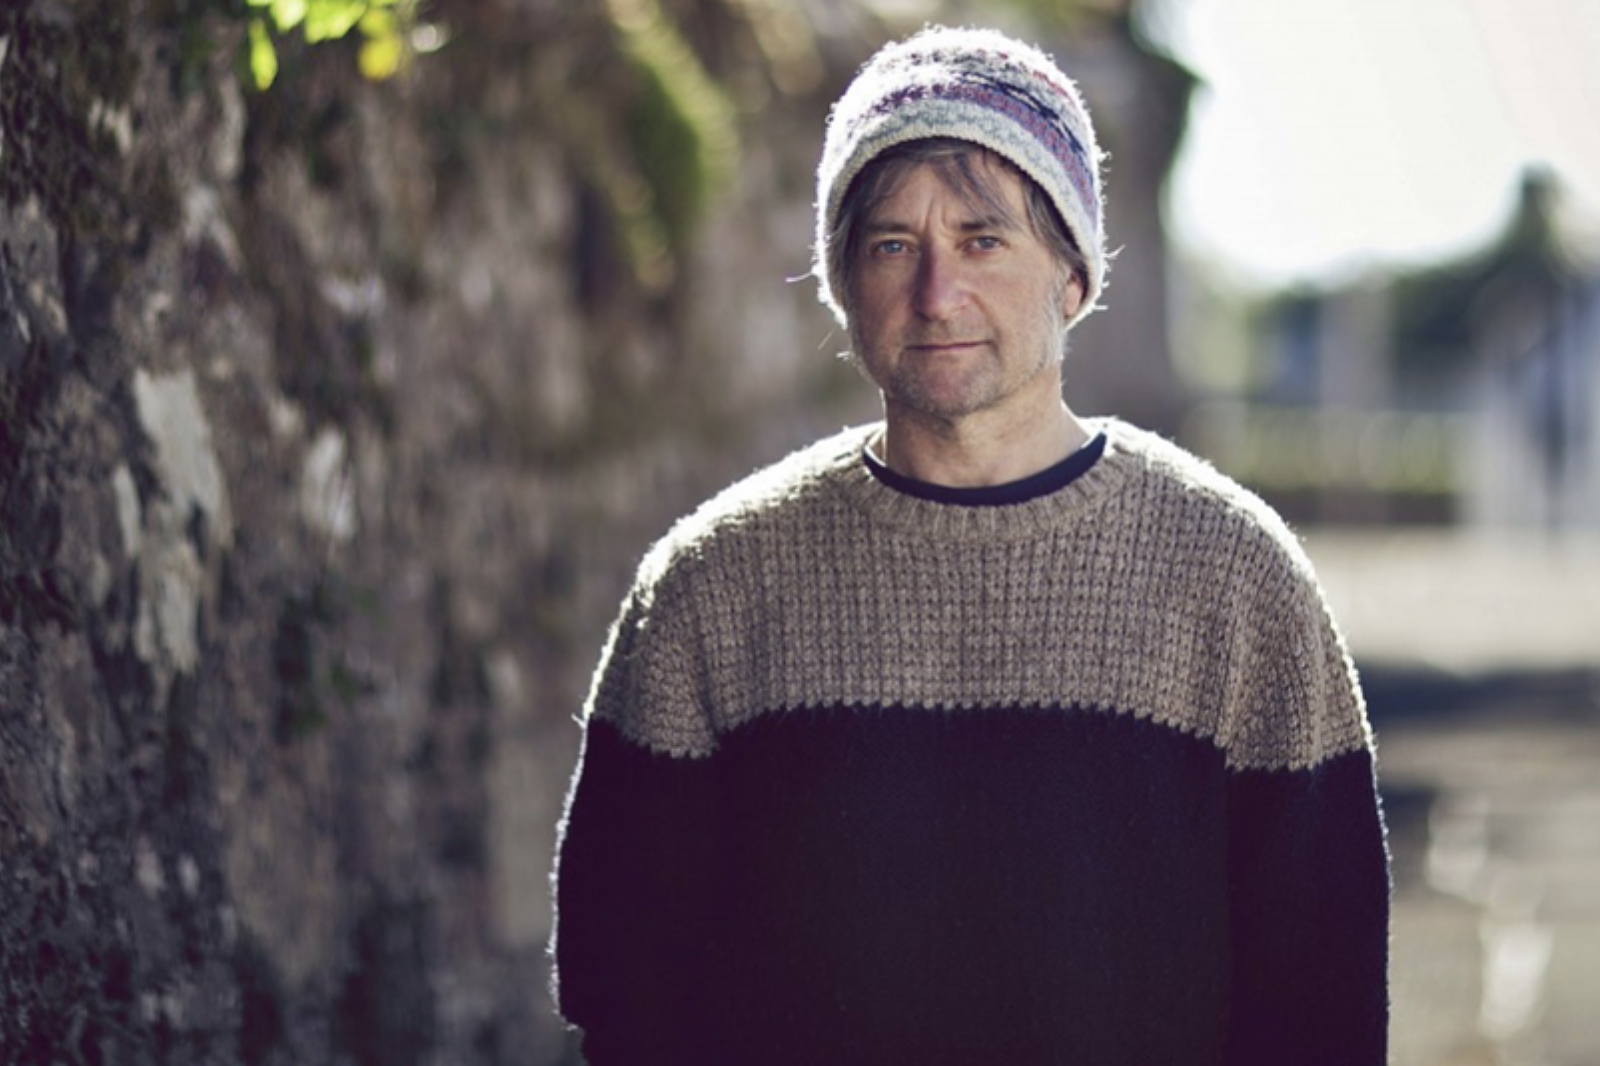 King Creosote returns with two new songs, 'Susie Mullen' and 'Walter de la Nightmare'